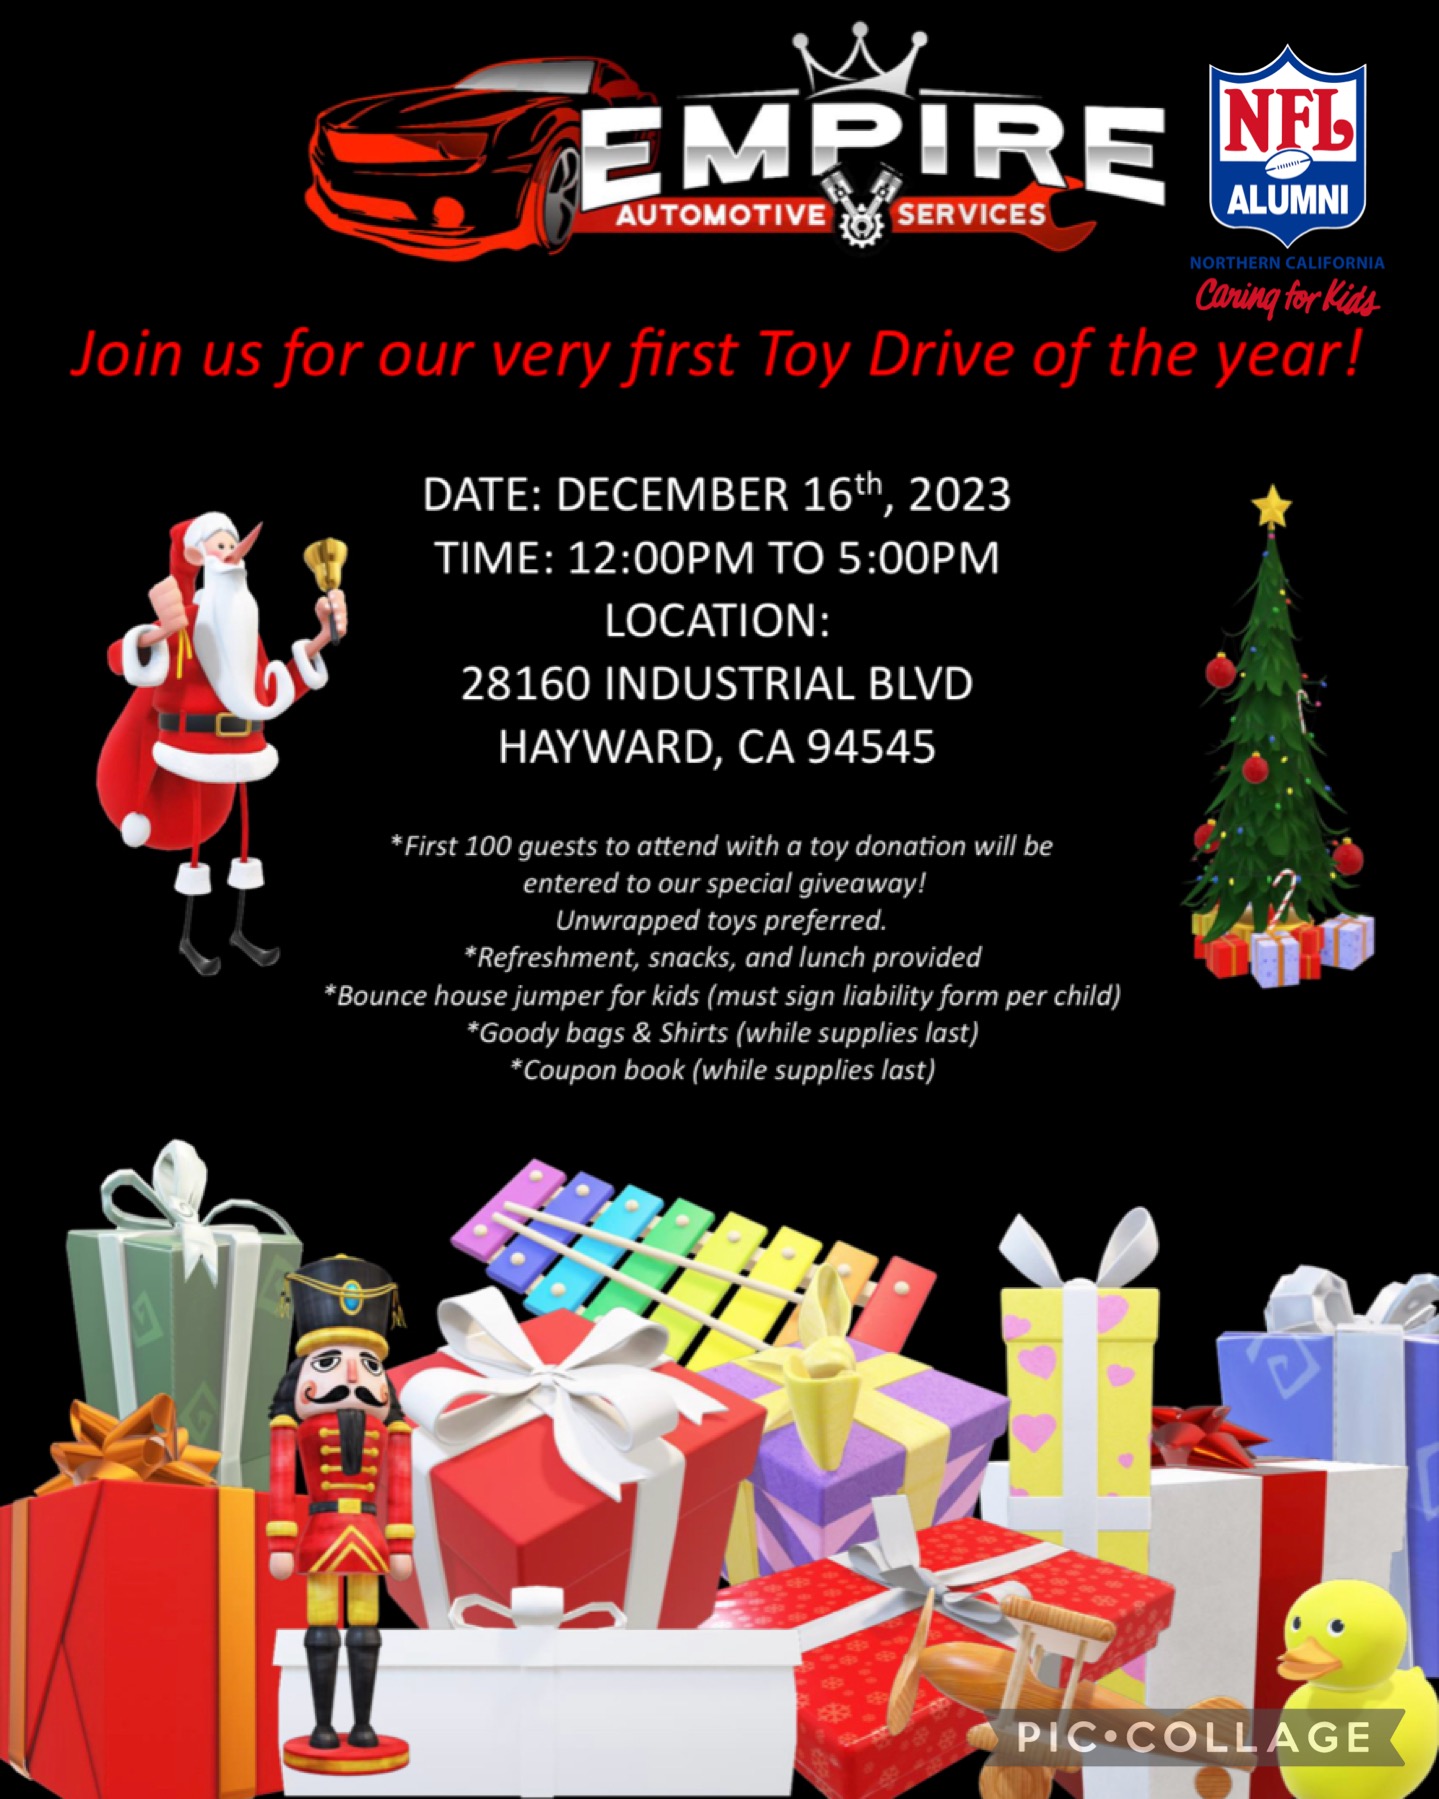 Toy Drive Christmas 2023 - Empire Automotive | NFL Alumni Northern California Chapter